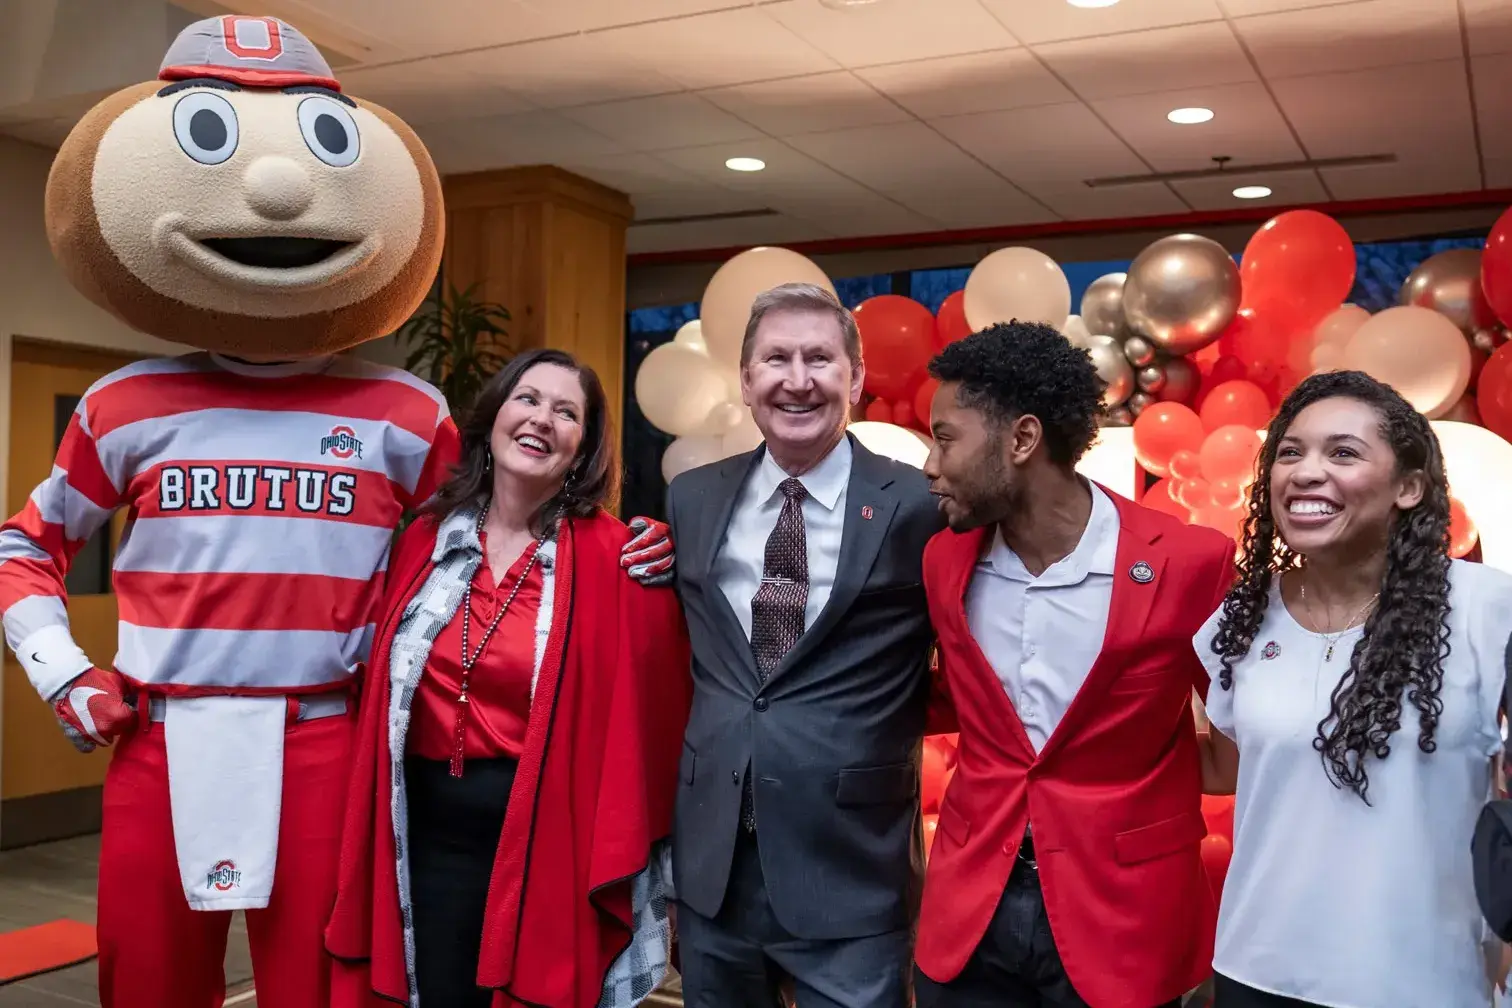 From left, Brutus Buckeye, First Lady Lynda Carter and President Carter, Undergraduate Student Government leaders Bobby McAlpine and Madison Mason, and Leah Fenstermaker ’23, who is getting her doctorate of dental surgery, line up at a student welcome reception in the Ohio Union